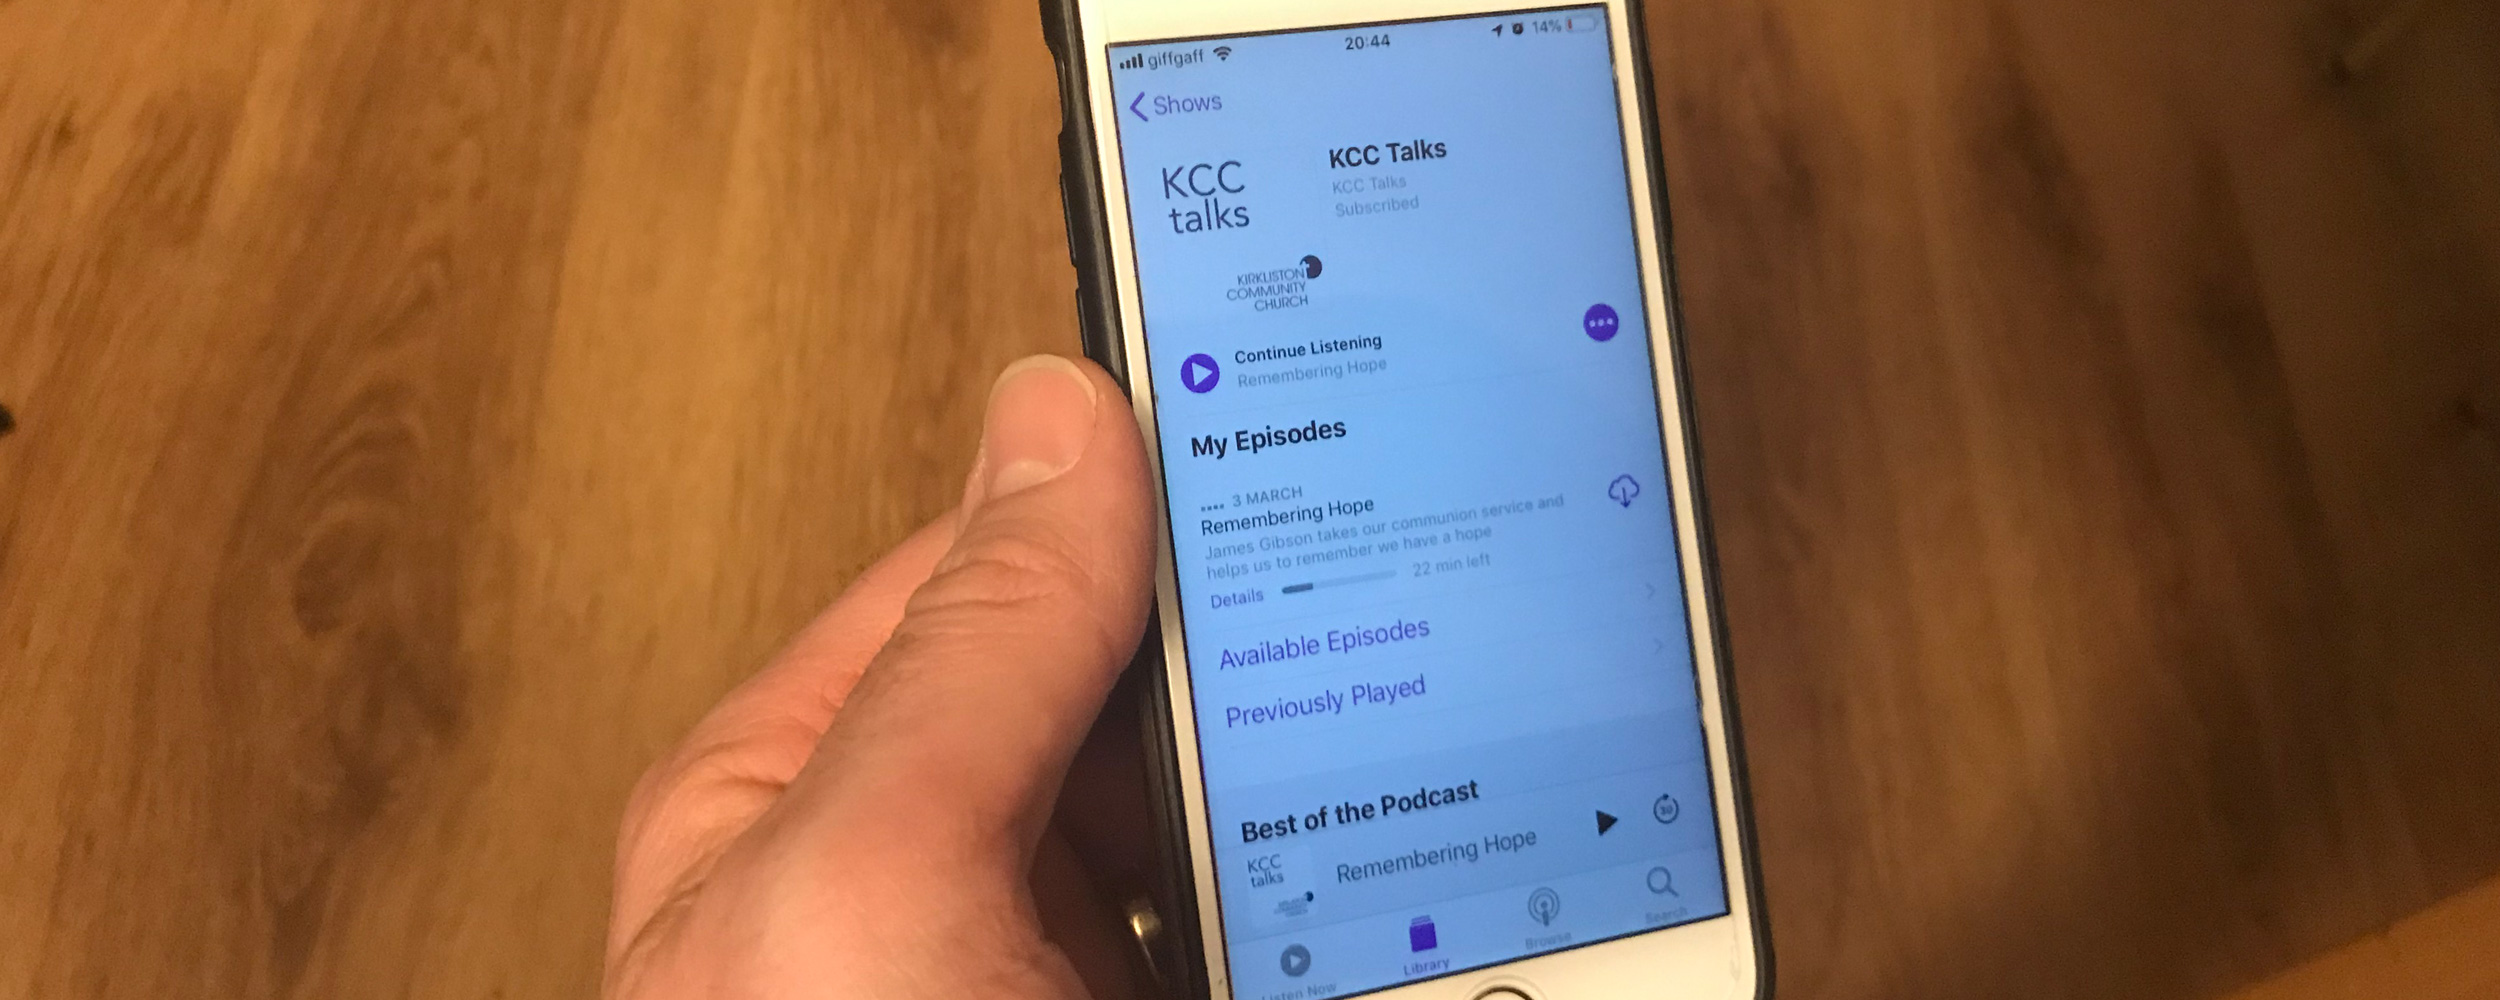 Image of iPhone showing the KC Talks Podcast